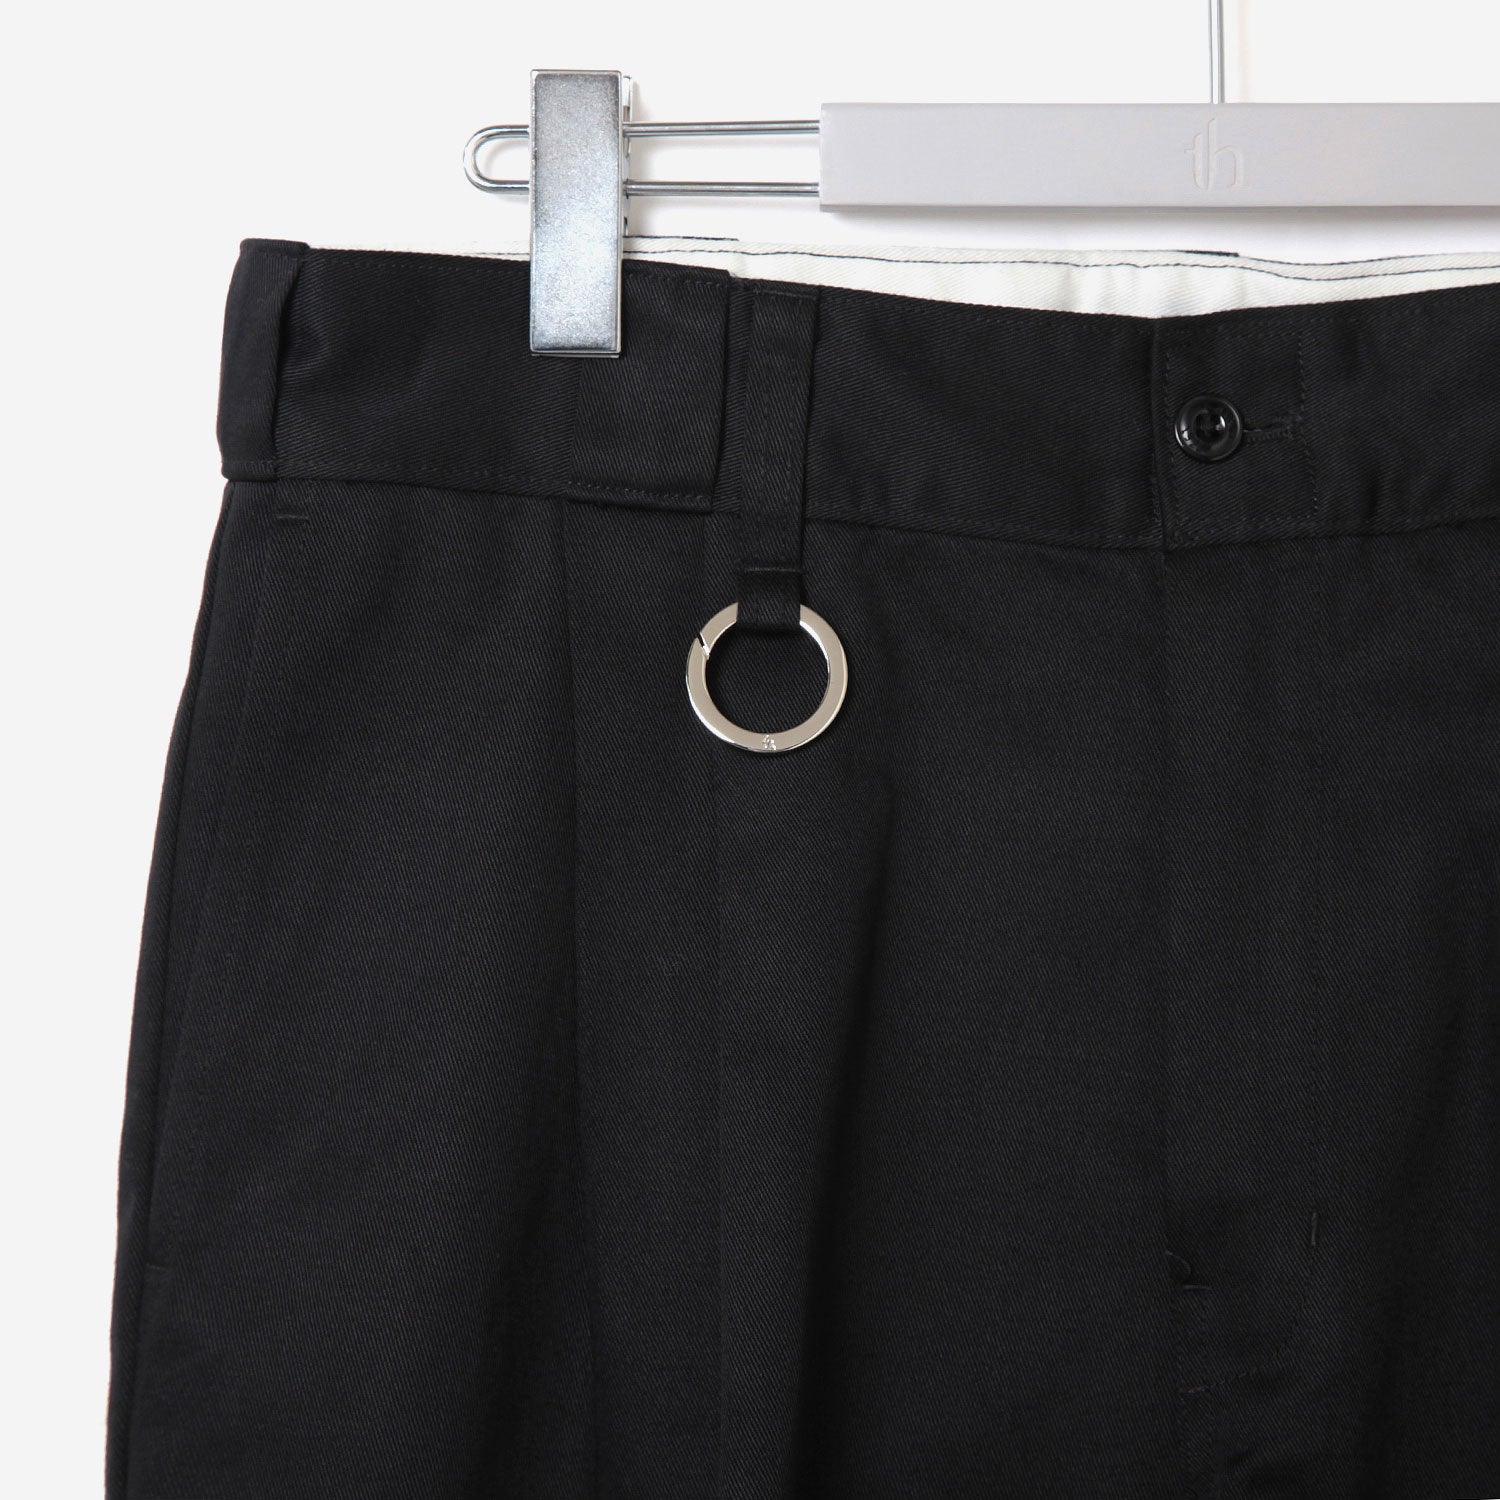 th products×Dickies Wide Tailored Pants / black